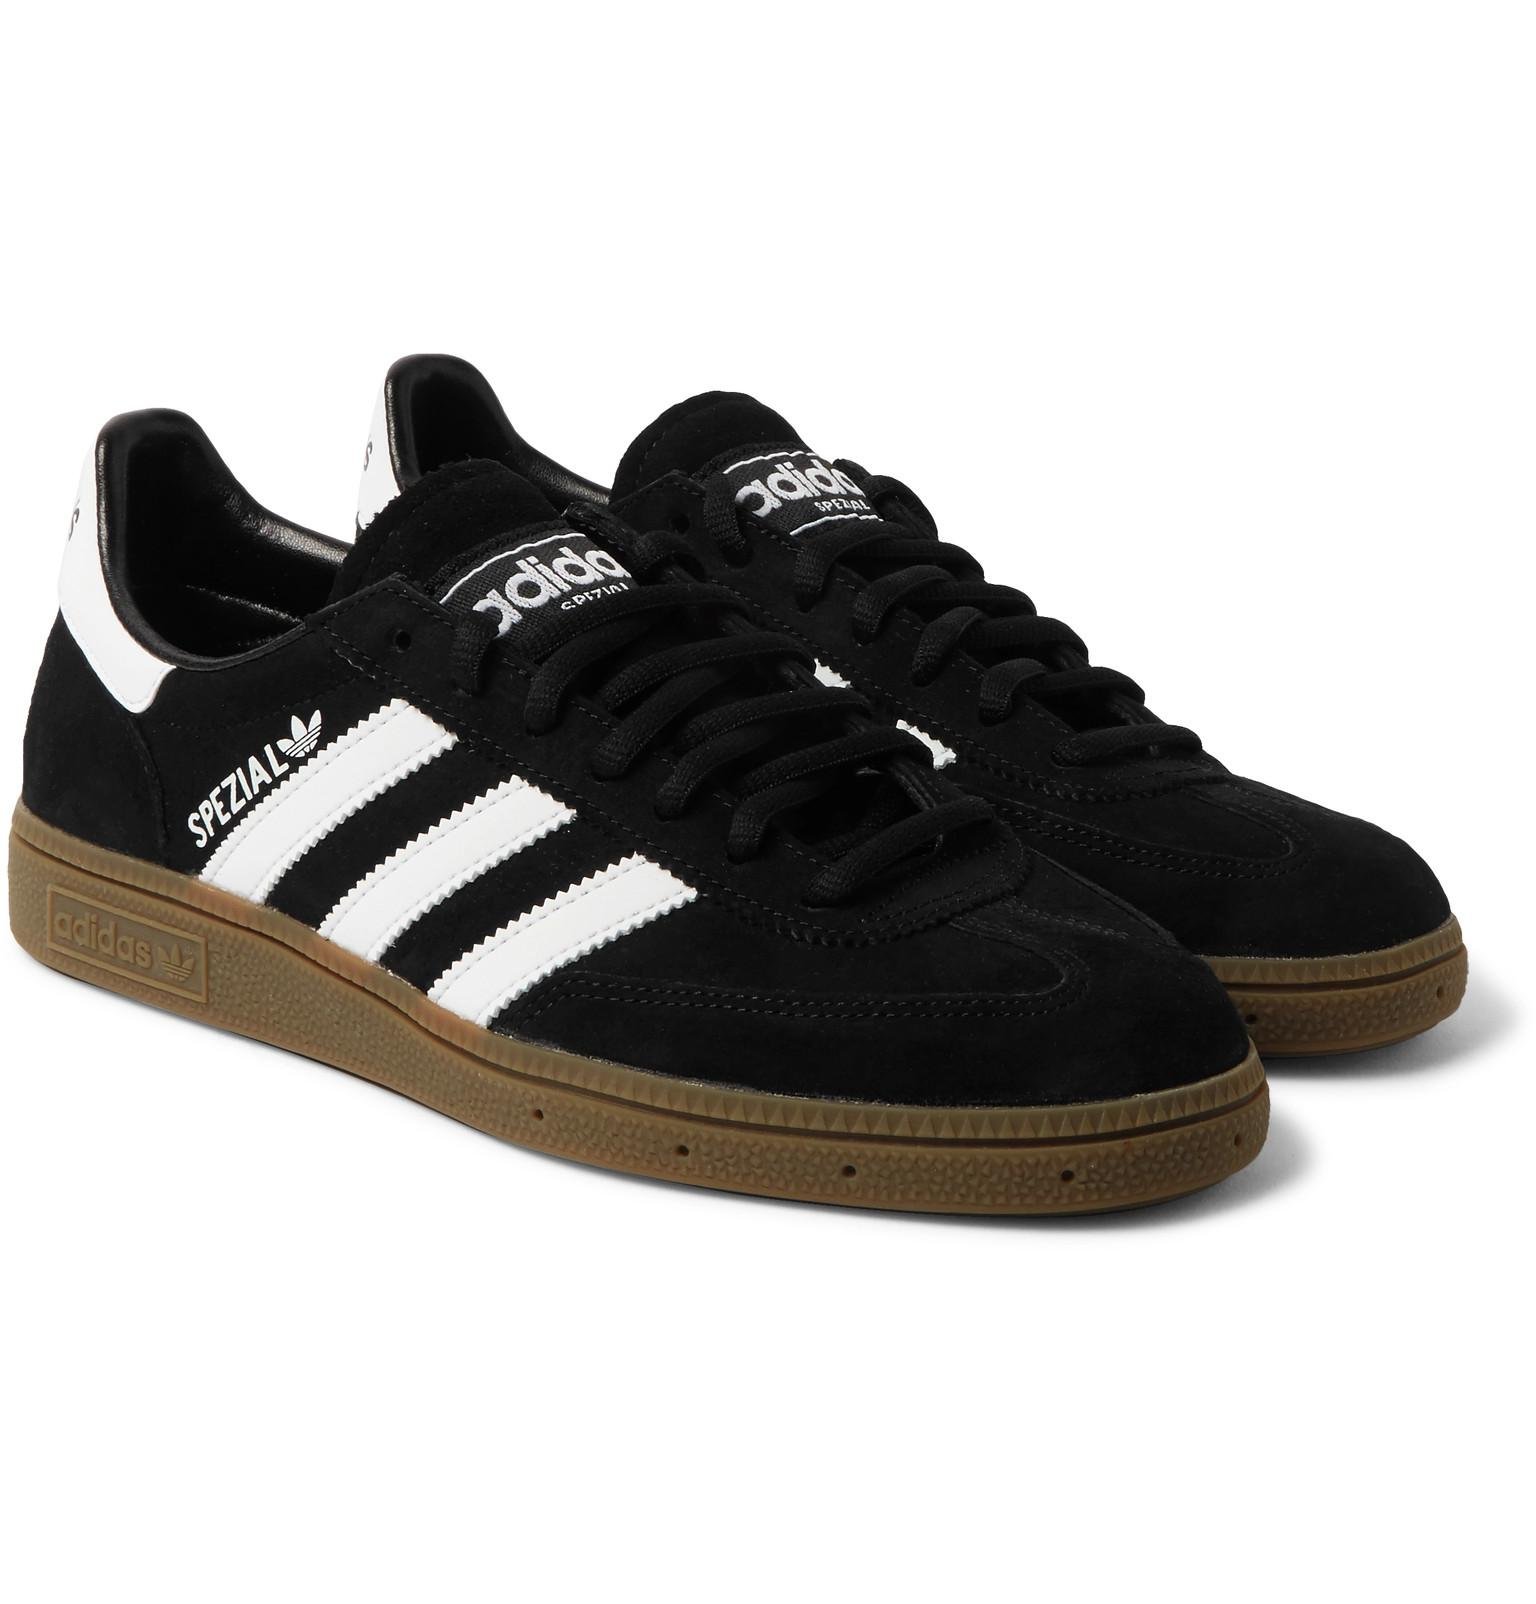 adidas Originals Spezial Leather-trimmed Suede Sneakers in Black for Men - Lyst